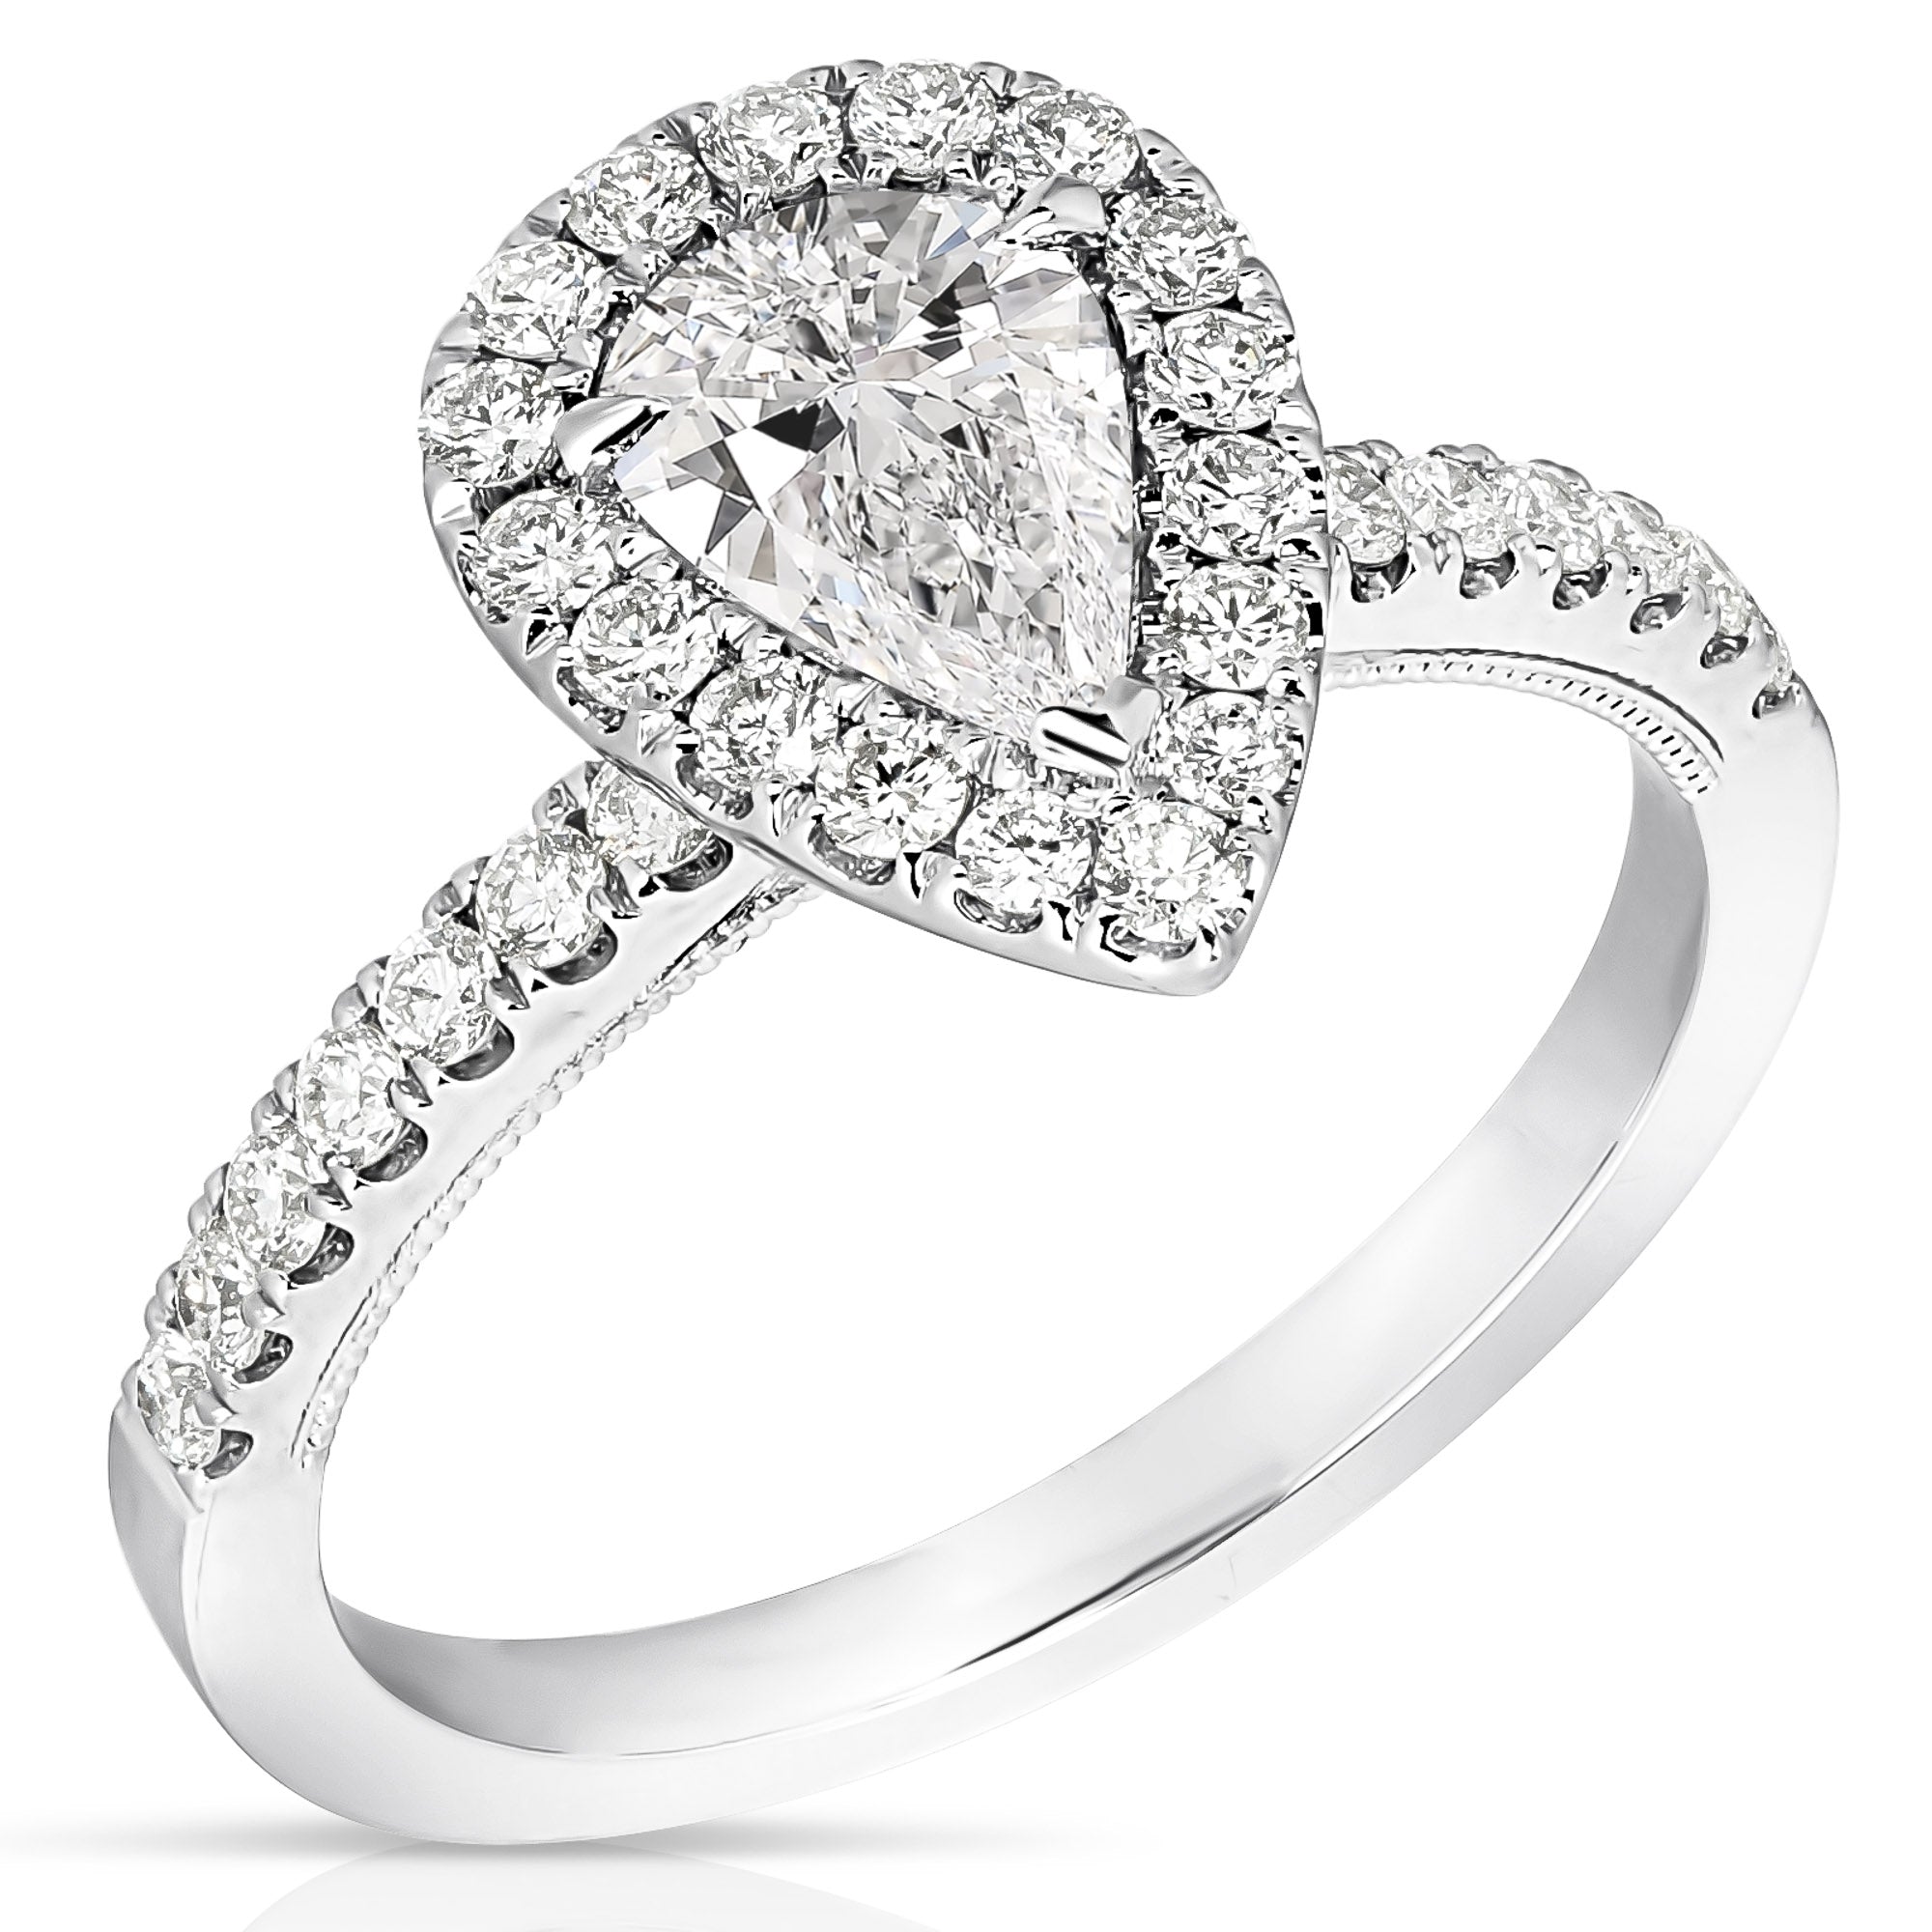 Antique Edwardian Old Pear Cut Diamond Ring 5.54ct in Platinum - Pear, Old  & Baguette Cut, Channel & Claw Set | Pragnell